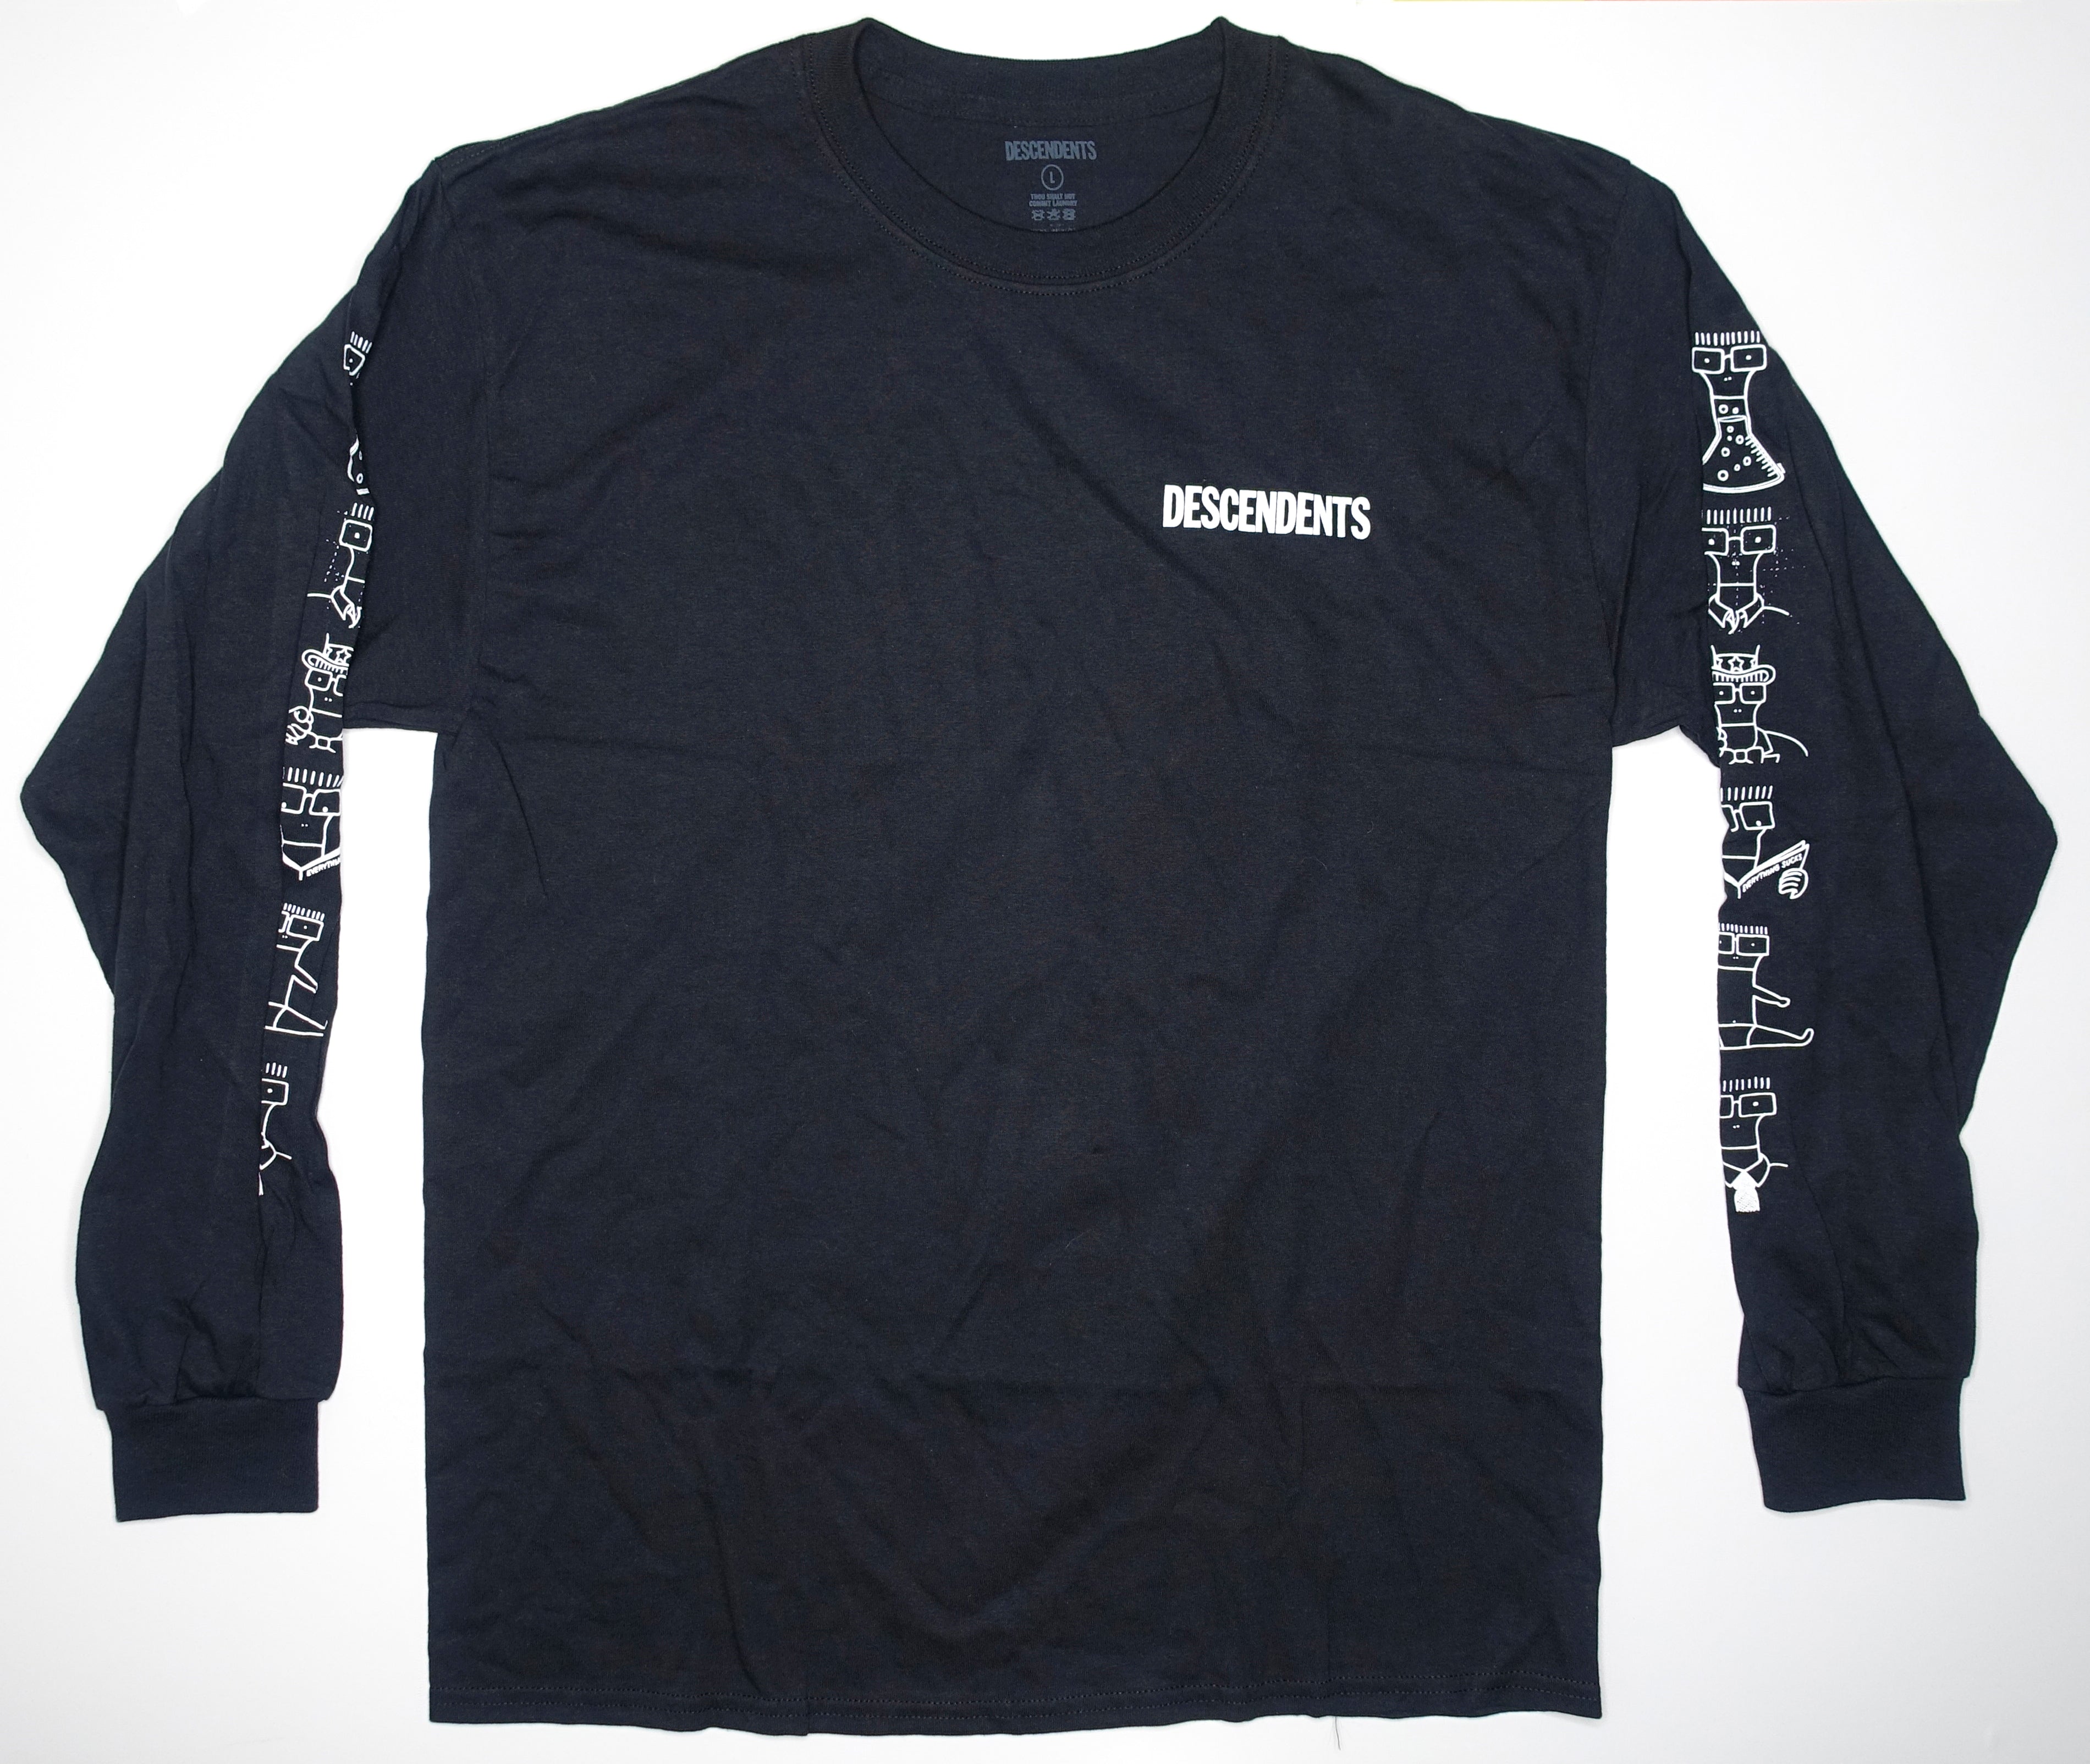 Descendents - Discography Long Sleeve Shirt Size Large